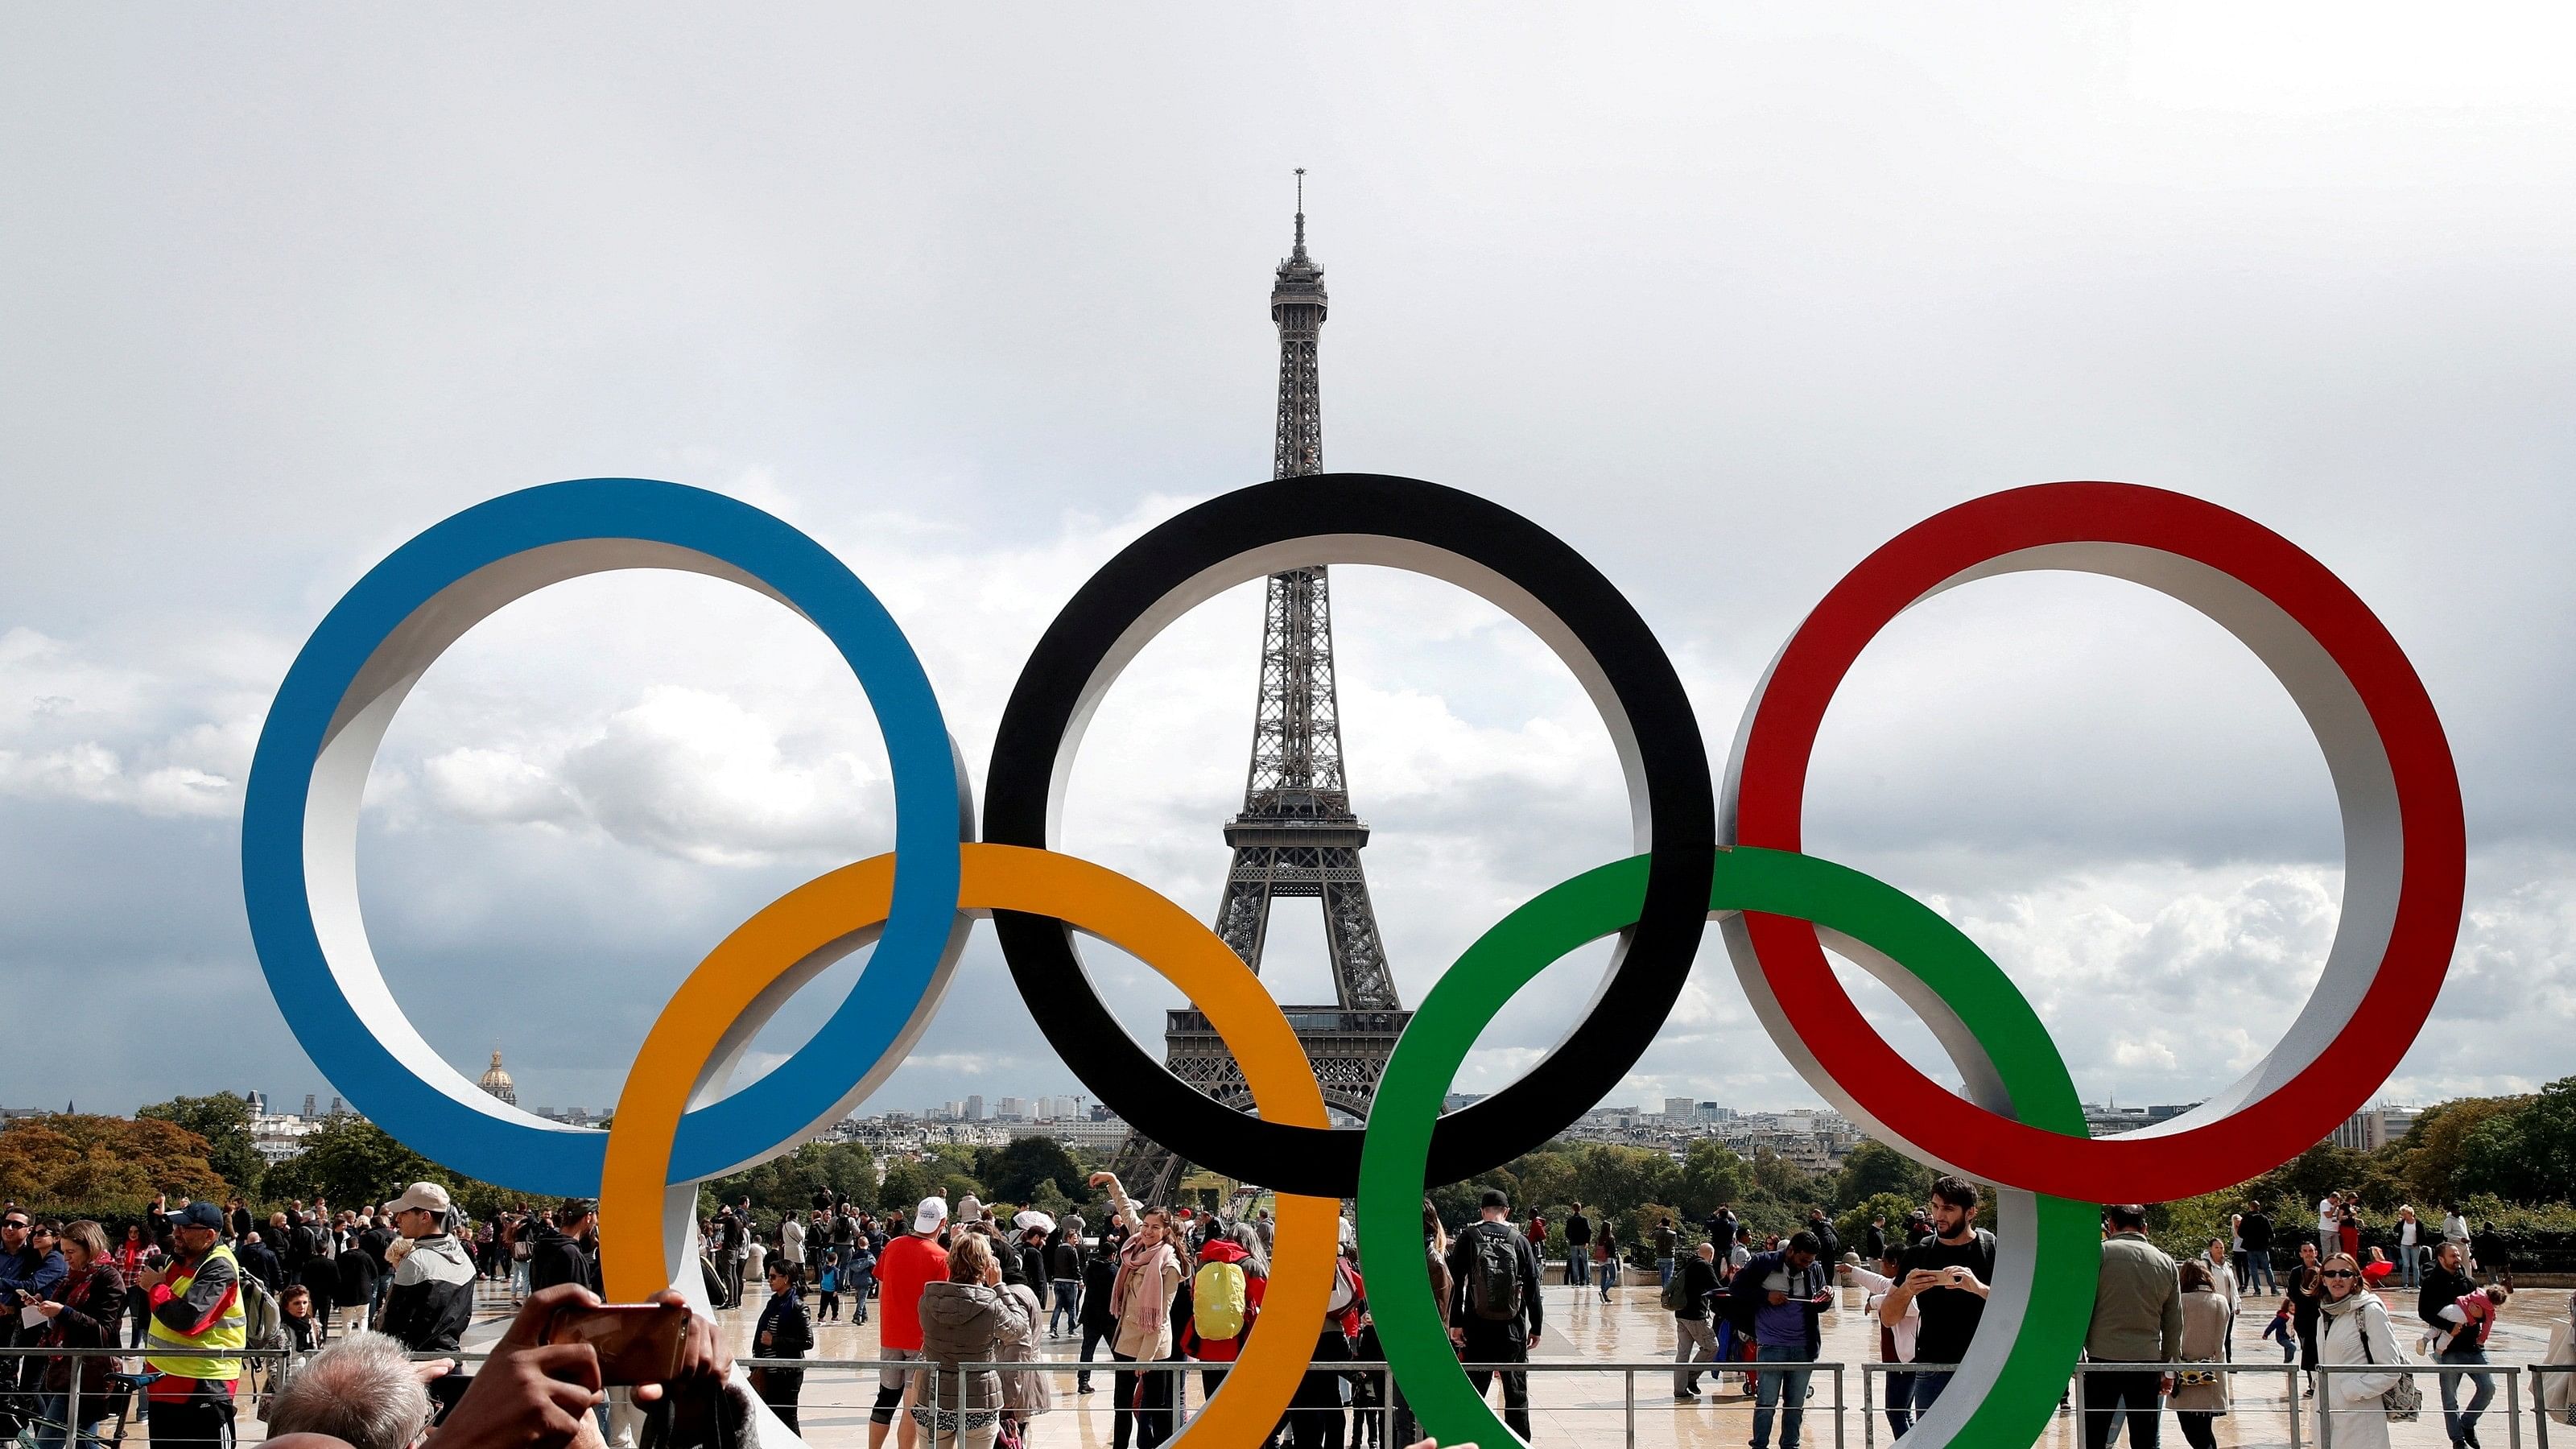 <div class="paragraphs"><p>Olympic rings to celebrate the IOC official announcement that Paris won the 2024 Olympic bid are seen in front of the Eiffel Tower at the Trocadero square in Paris, France.&nbsp;</p></div>